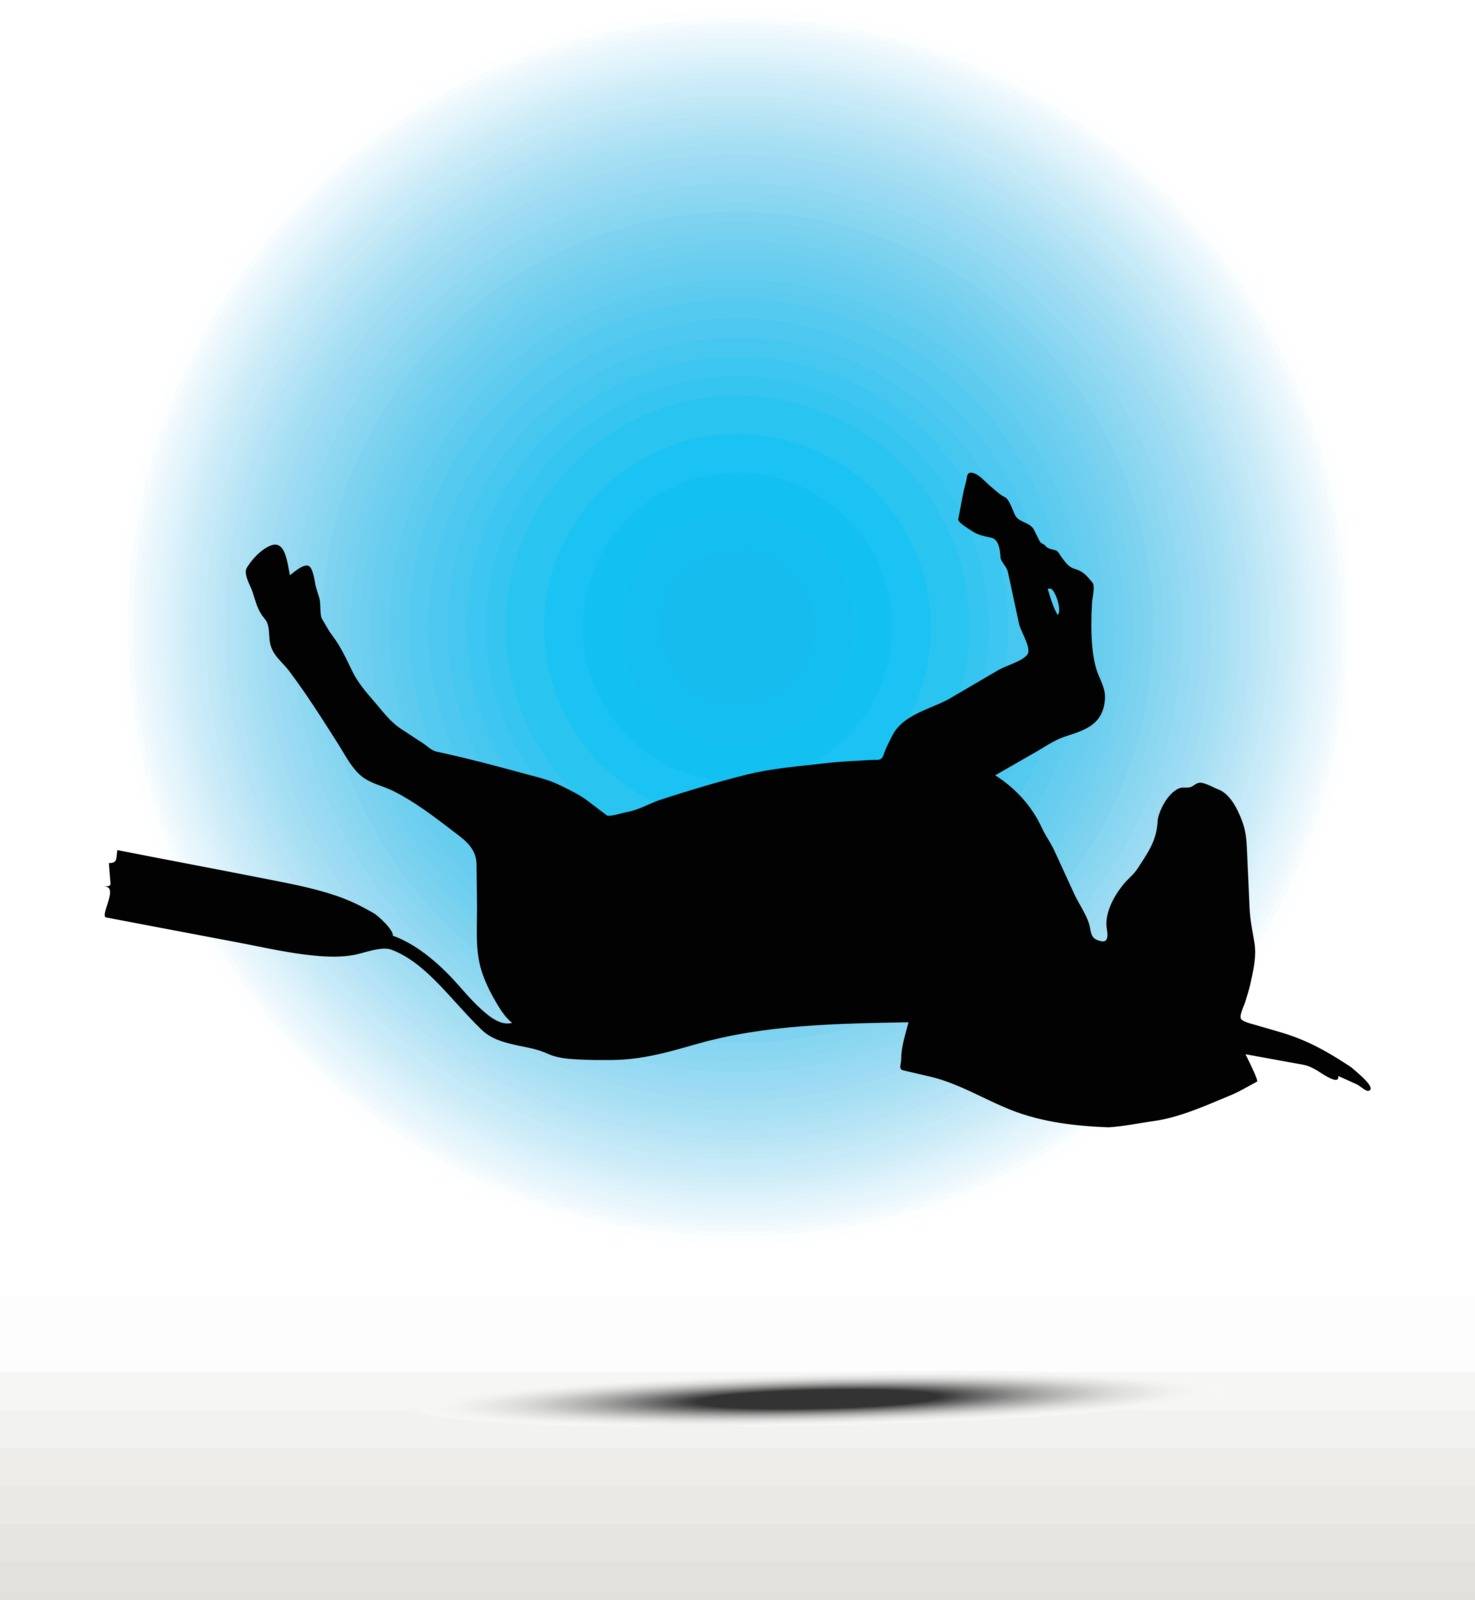 Vector Image, donkey silhouette, in falling pose, isolated on white background
